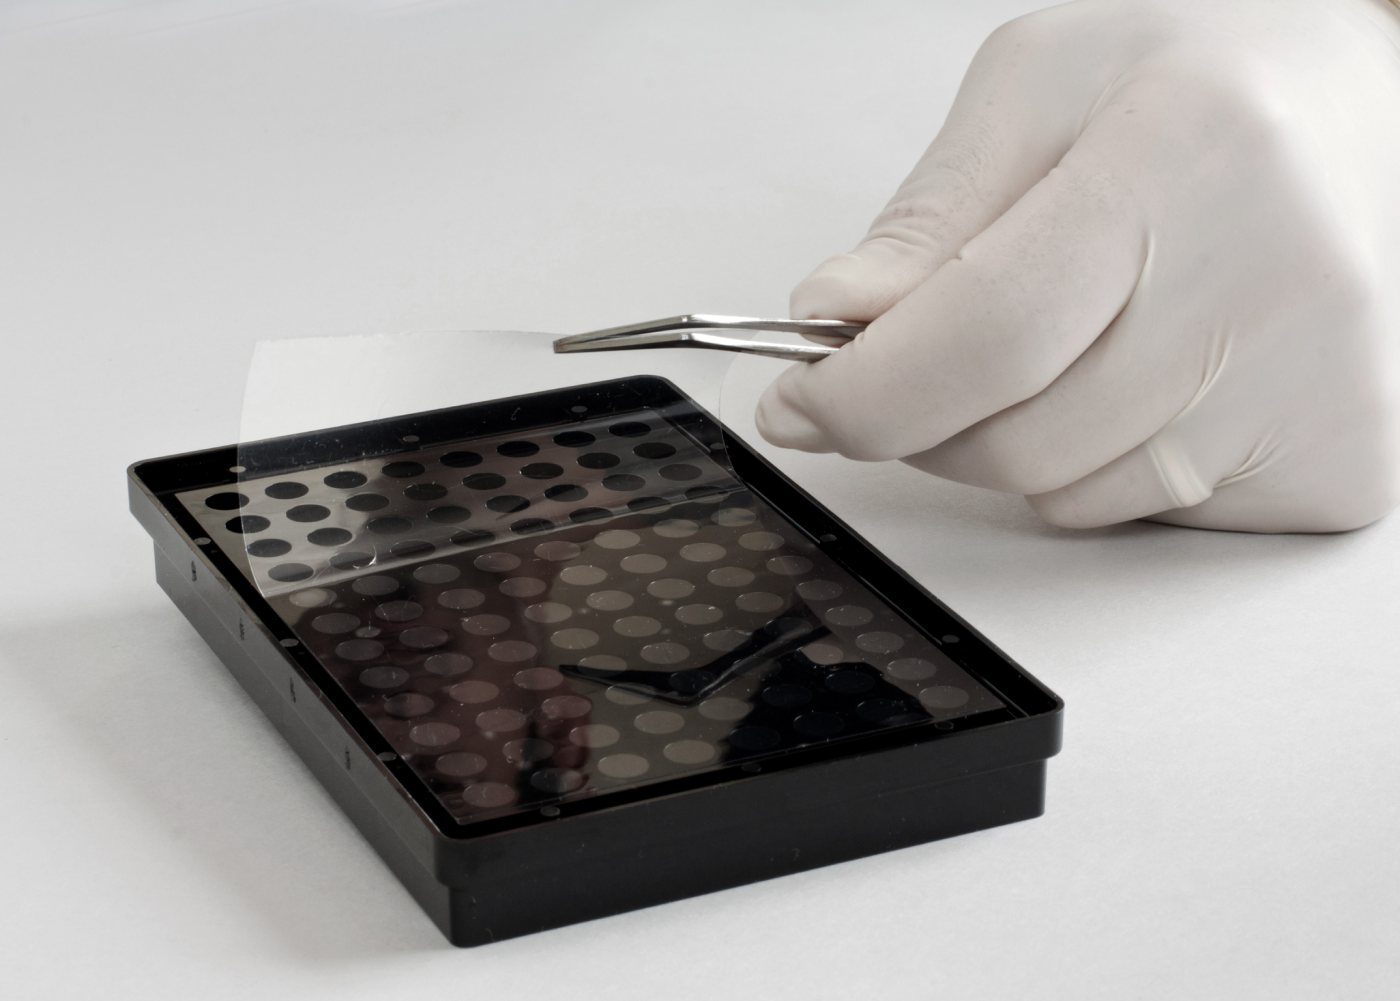 Acktar 3D Transparent Bottom Cell Culture Coated Microplates